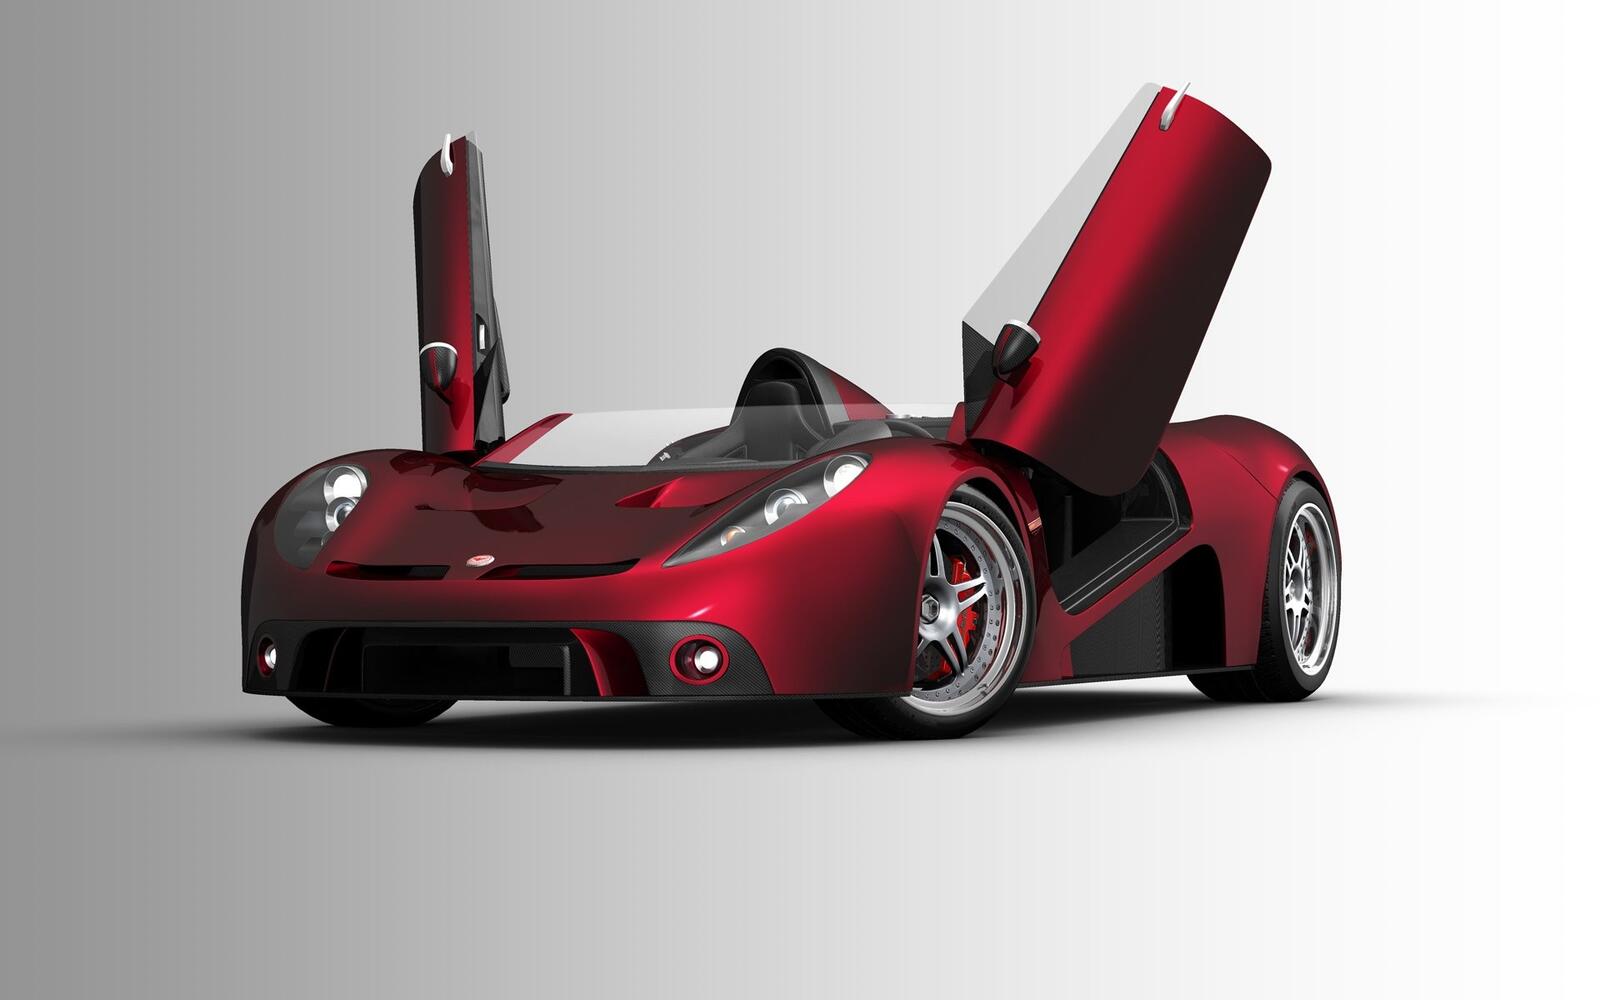 Wallpapers car red sports car on the desktop